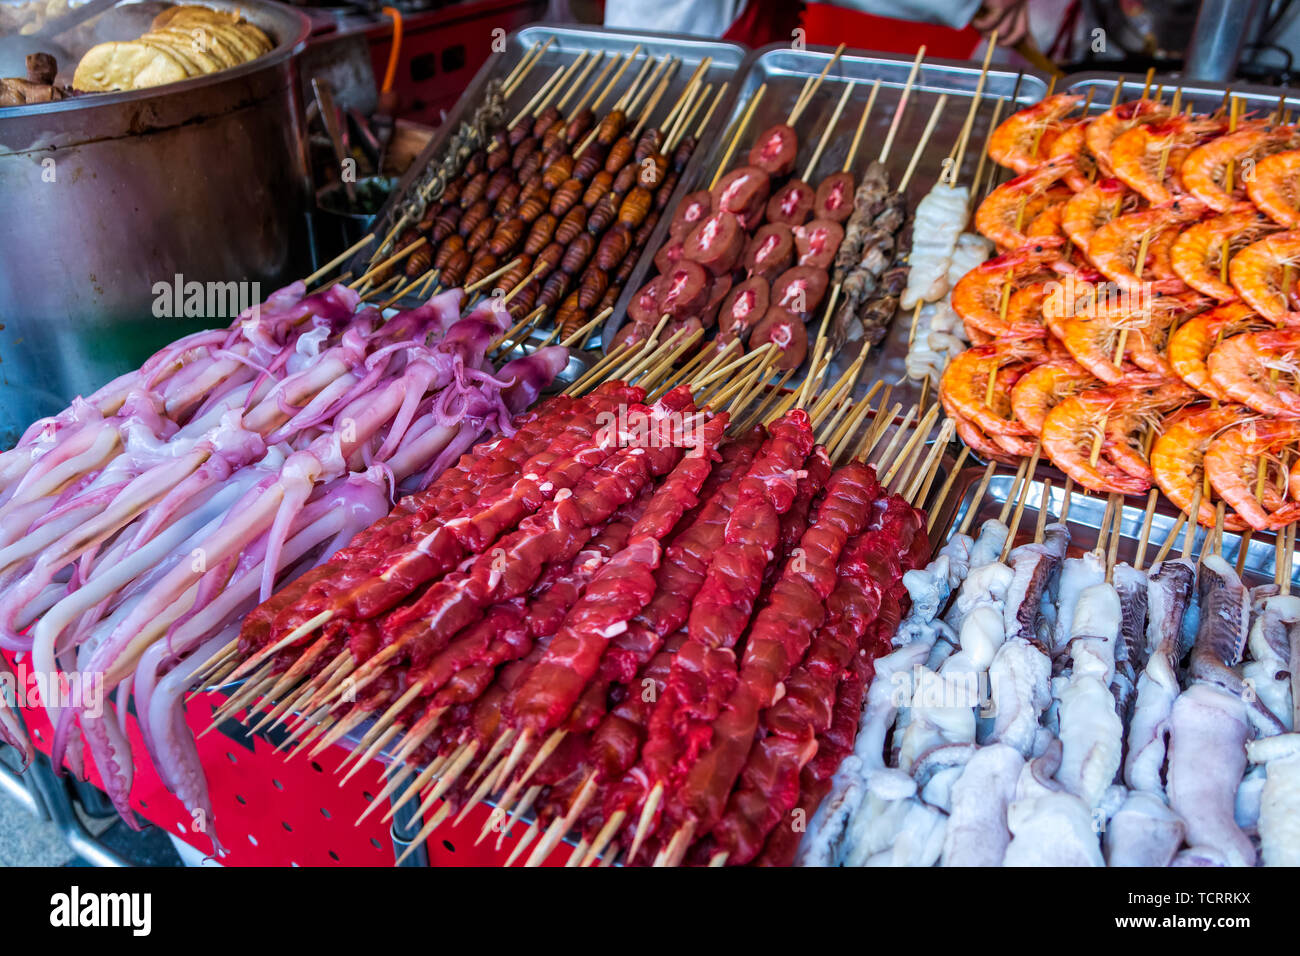 Roasted, fried and raw insects, silkworms, scorpions, bugs, snakes, dog meat, shrimps, octopus on stick as snack street food in China Stock Photo